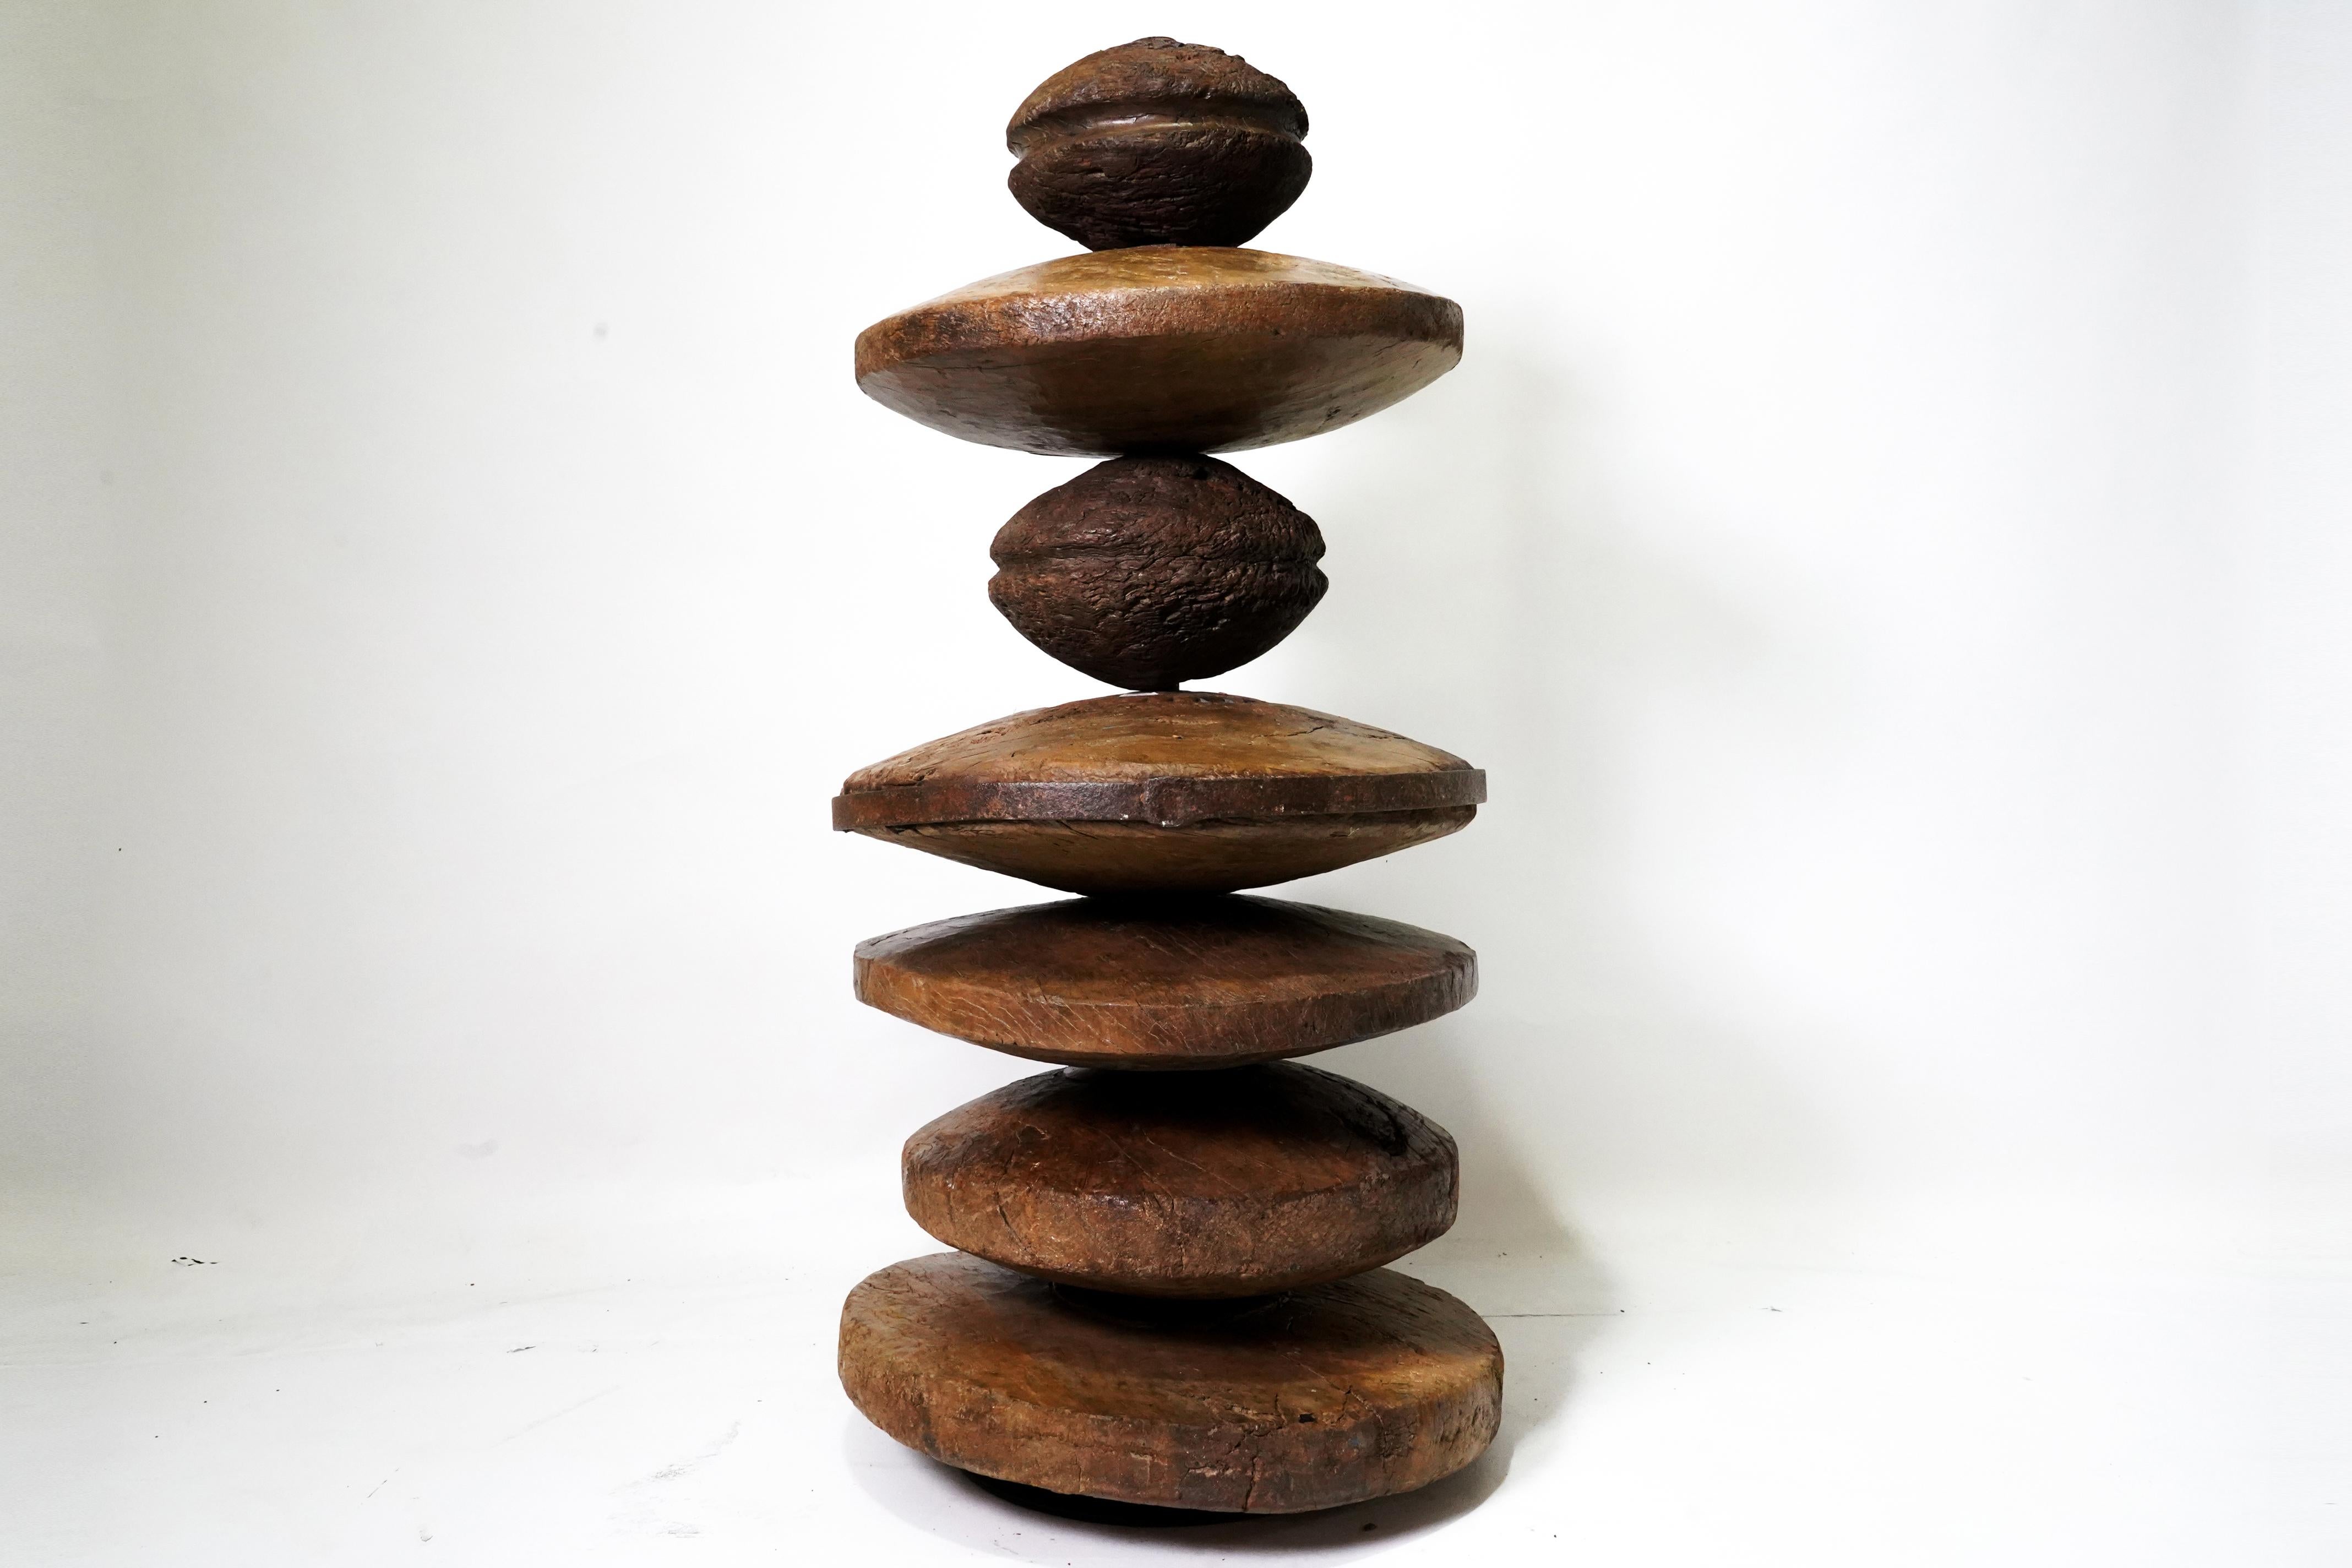 Monumental Modern Sculpture Assembled From Ancient Wooden Wheels and Pulleys 4